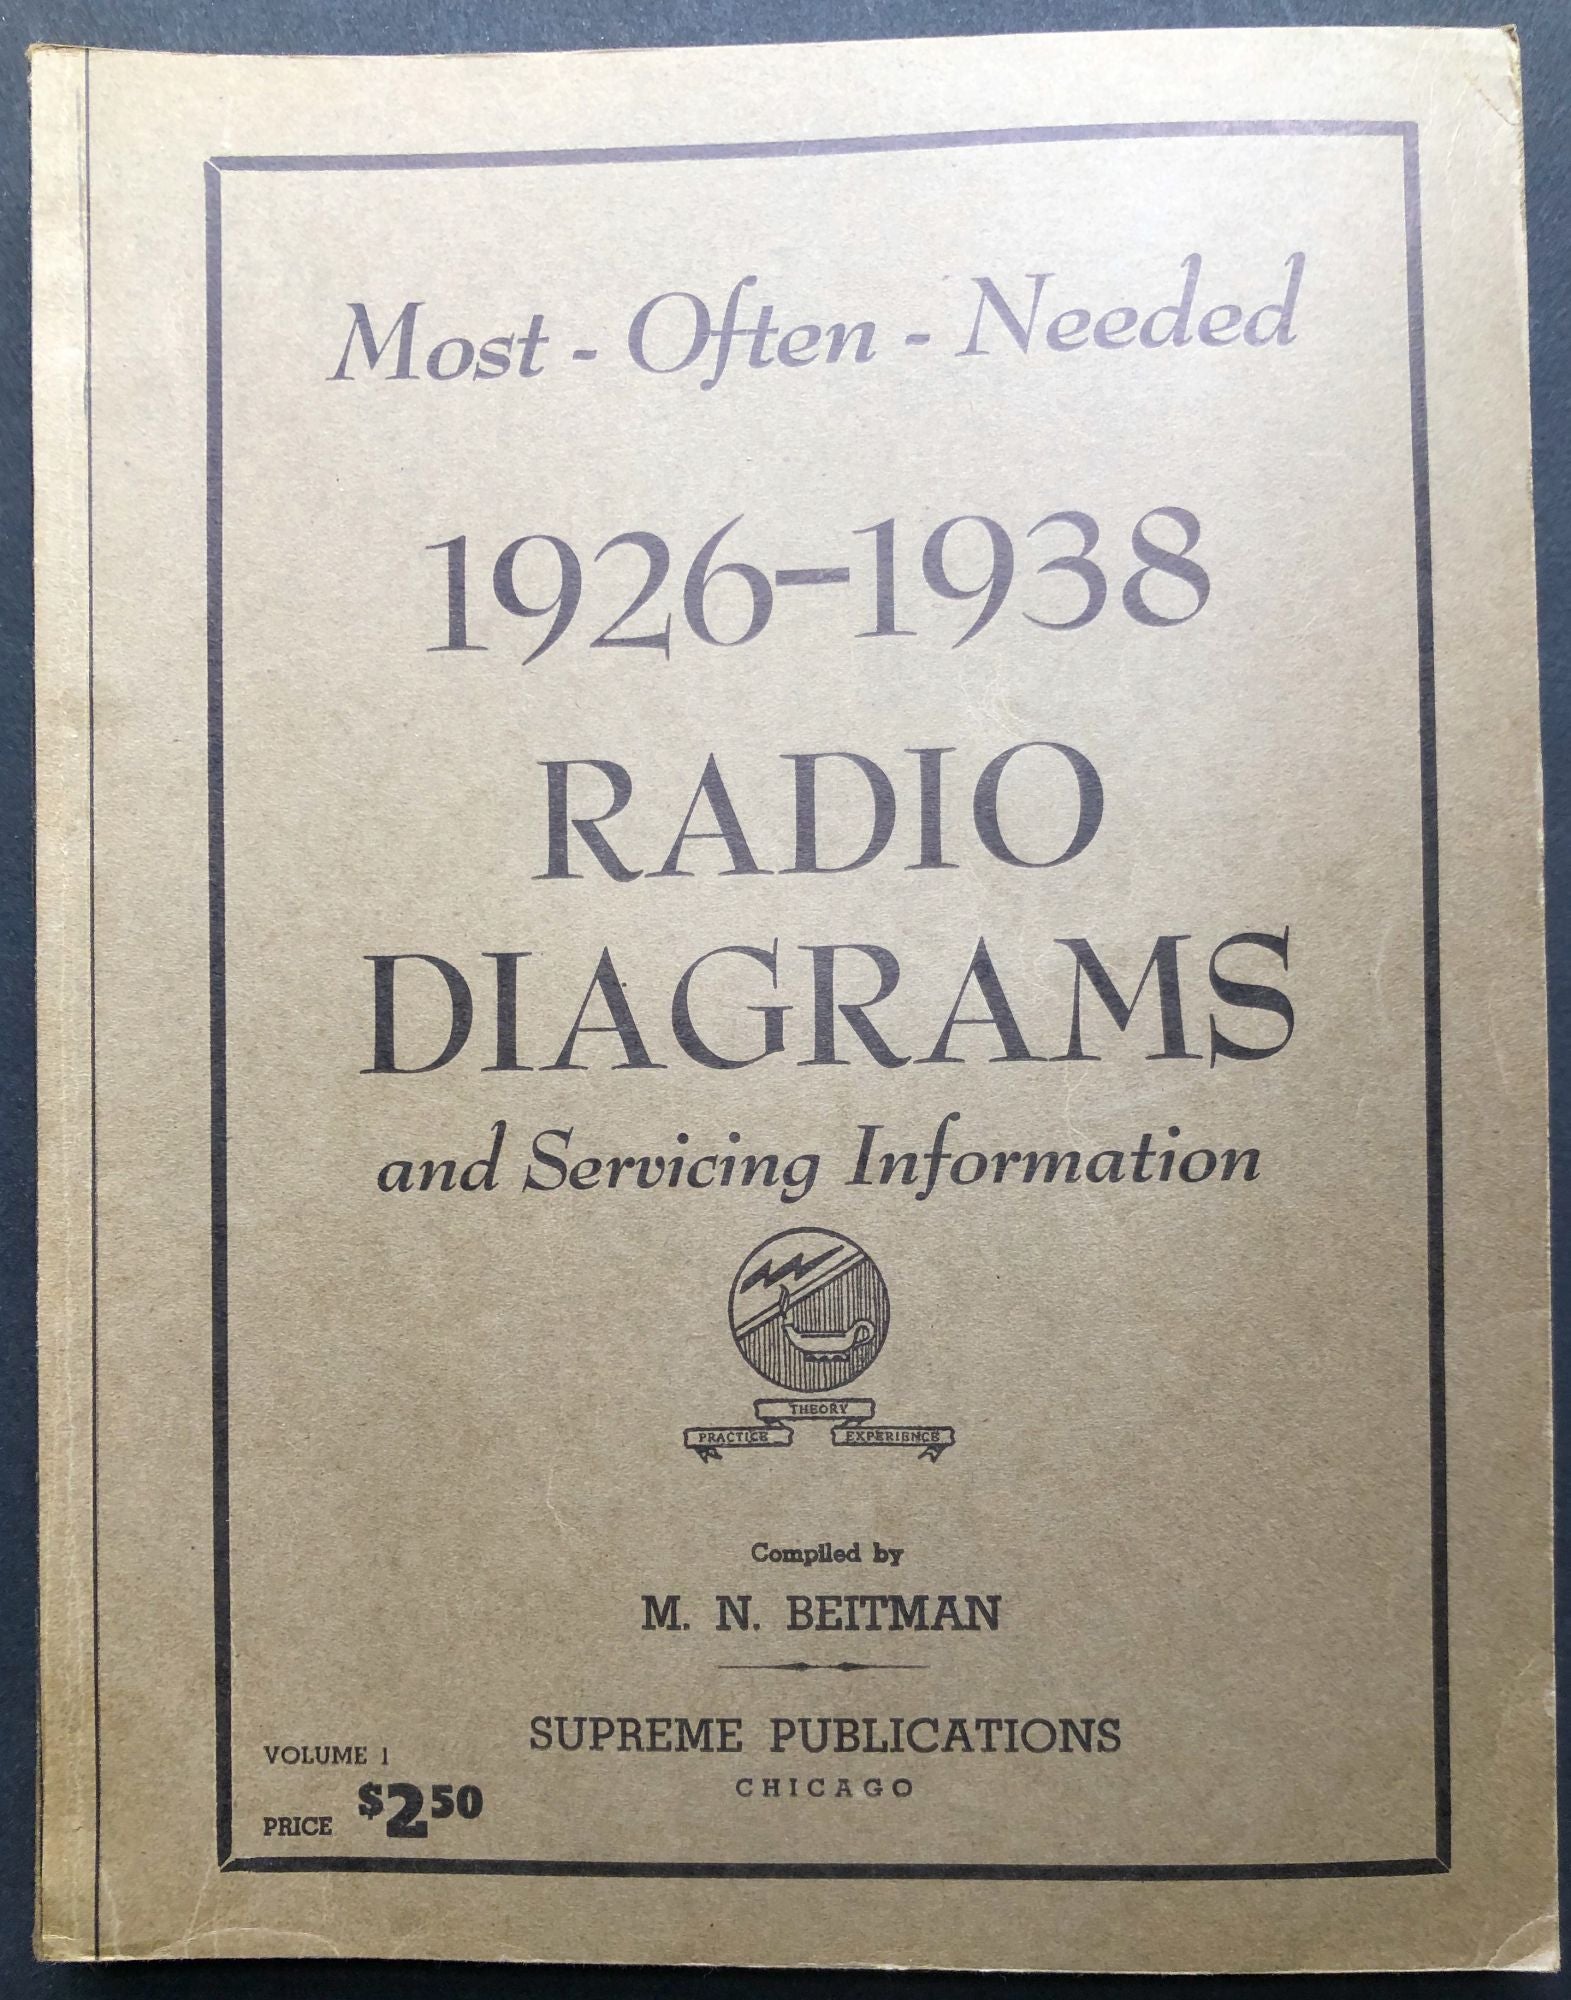 Most Often Needed: 1926-1938 Radio Diagrams and Servicing Information by M.  N. Beitman on Common Crow Books